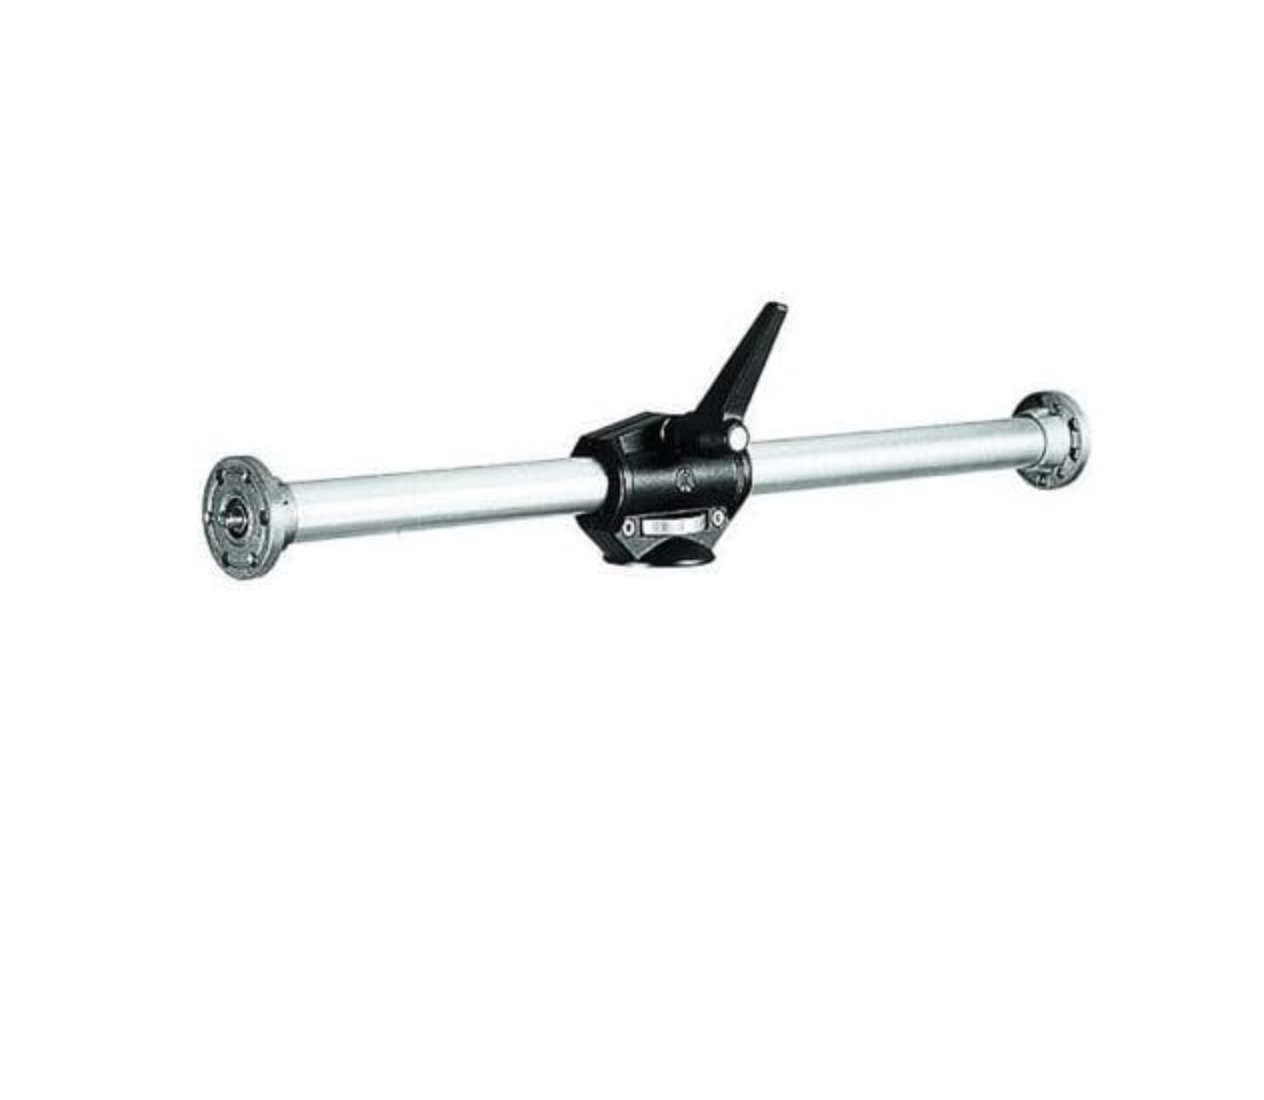 Manfrotto 131D Side Arm for Tripods